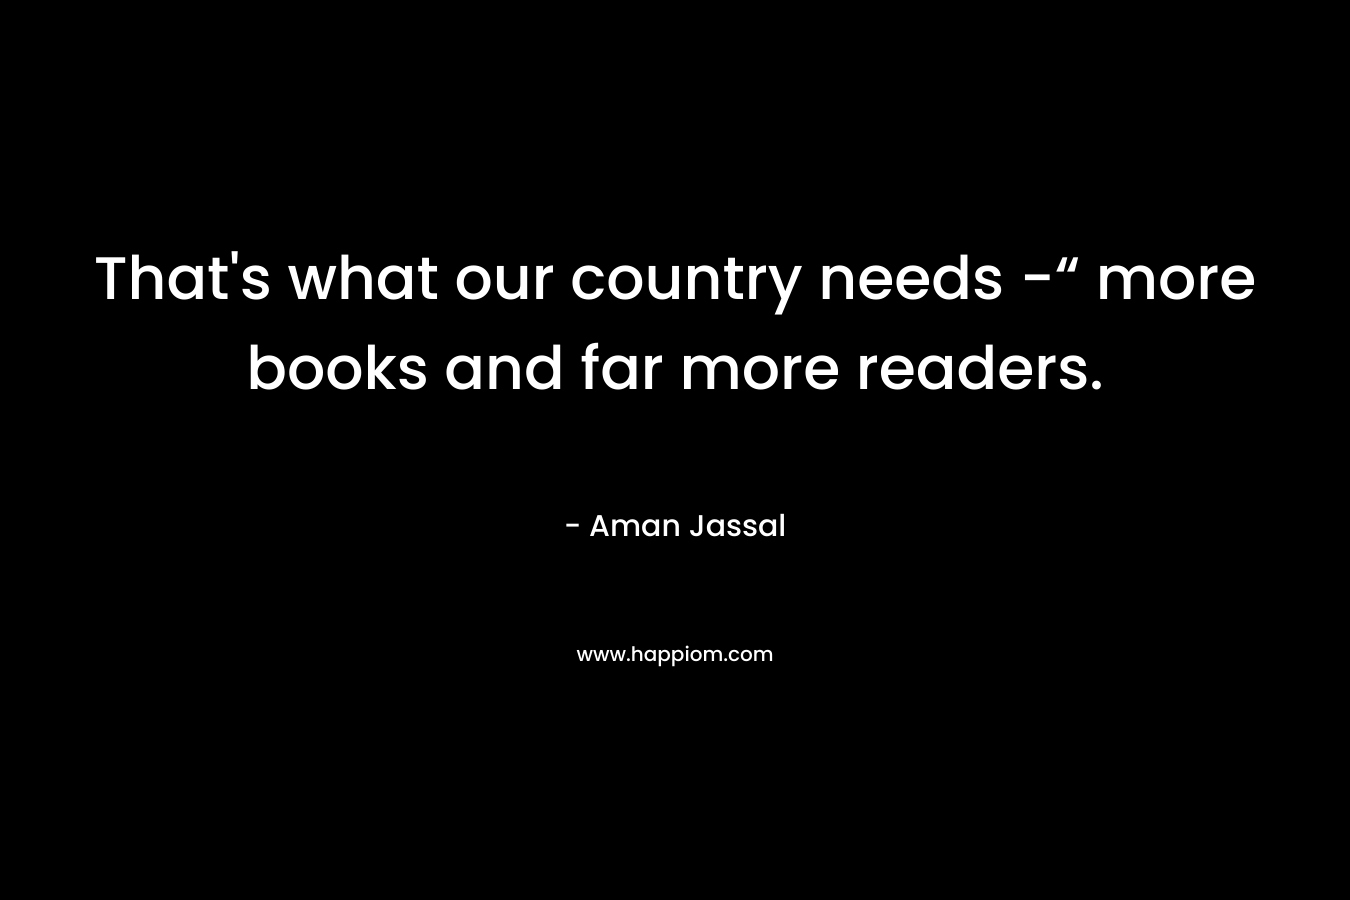 That's what our country needs -“ more books and far more readers.